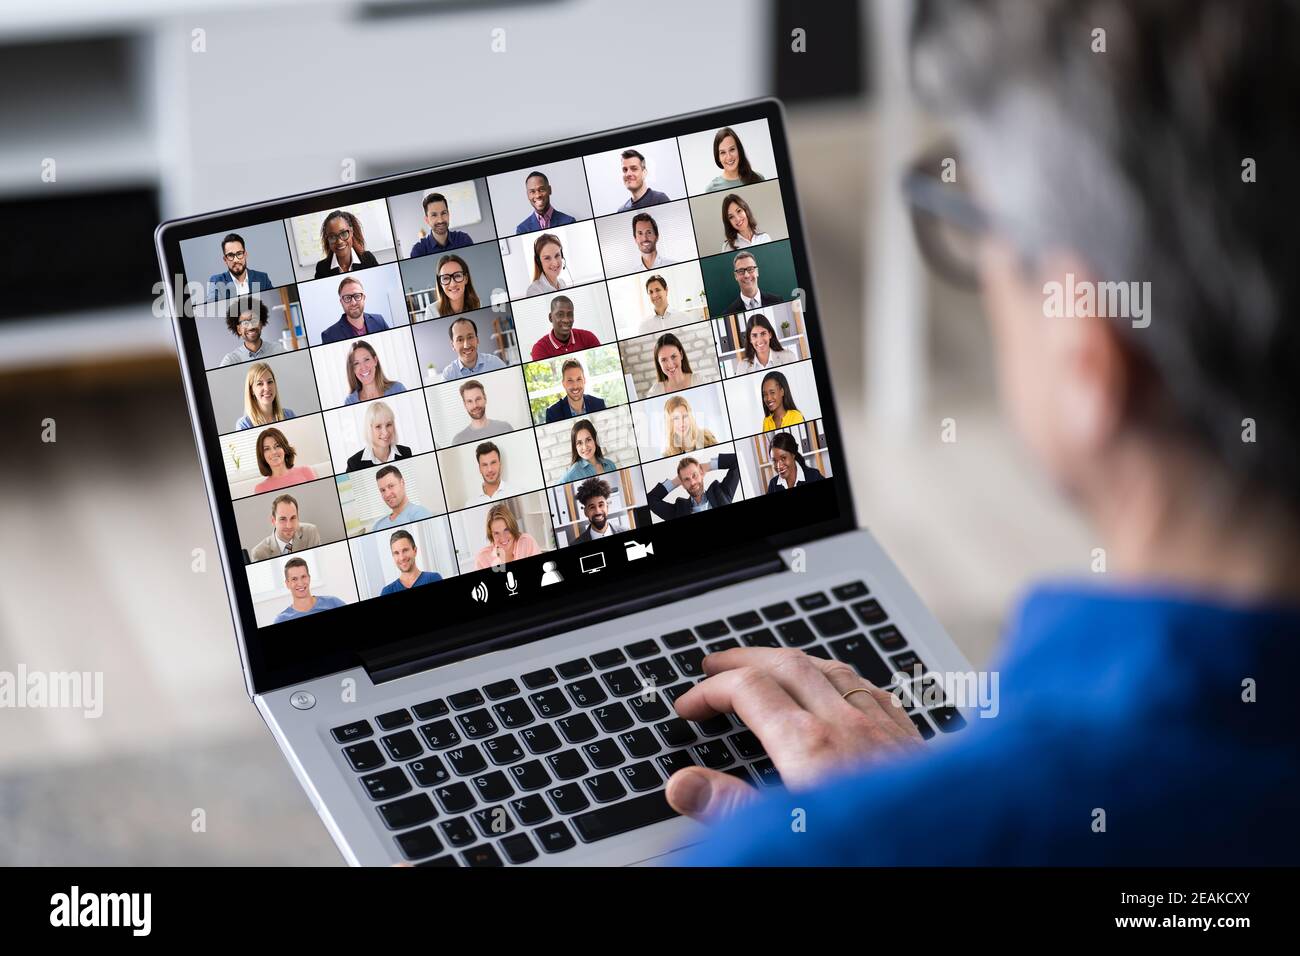 Online Business Video Conference Stock Photo